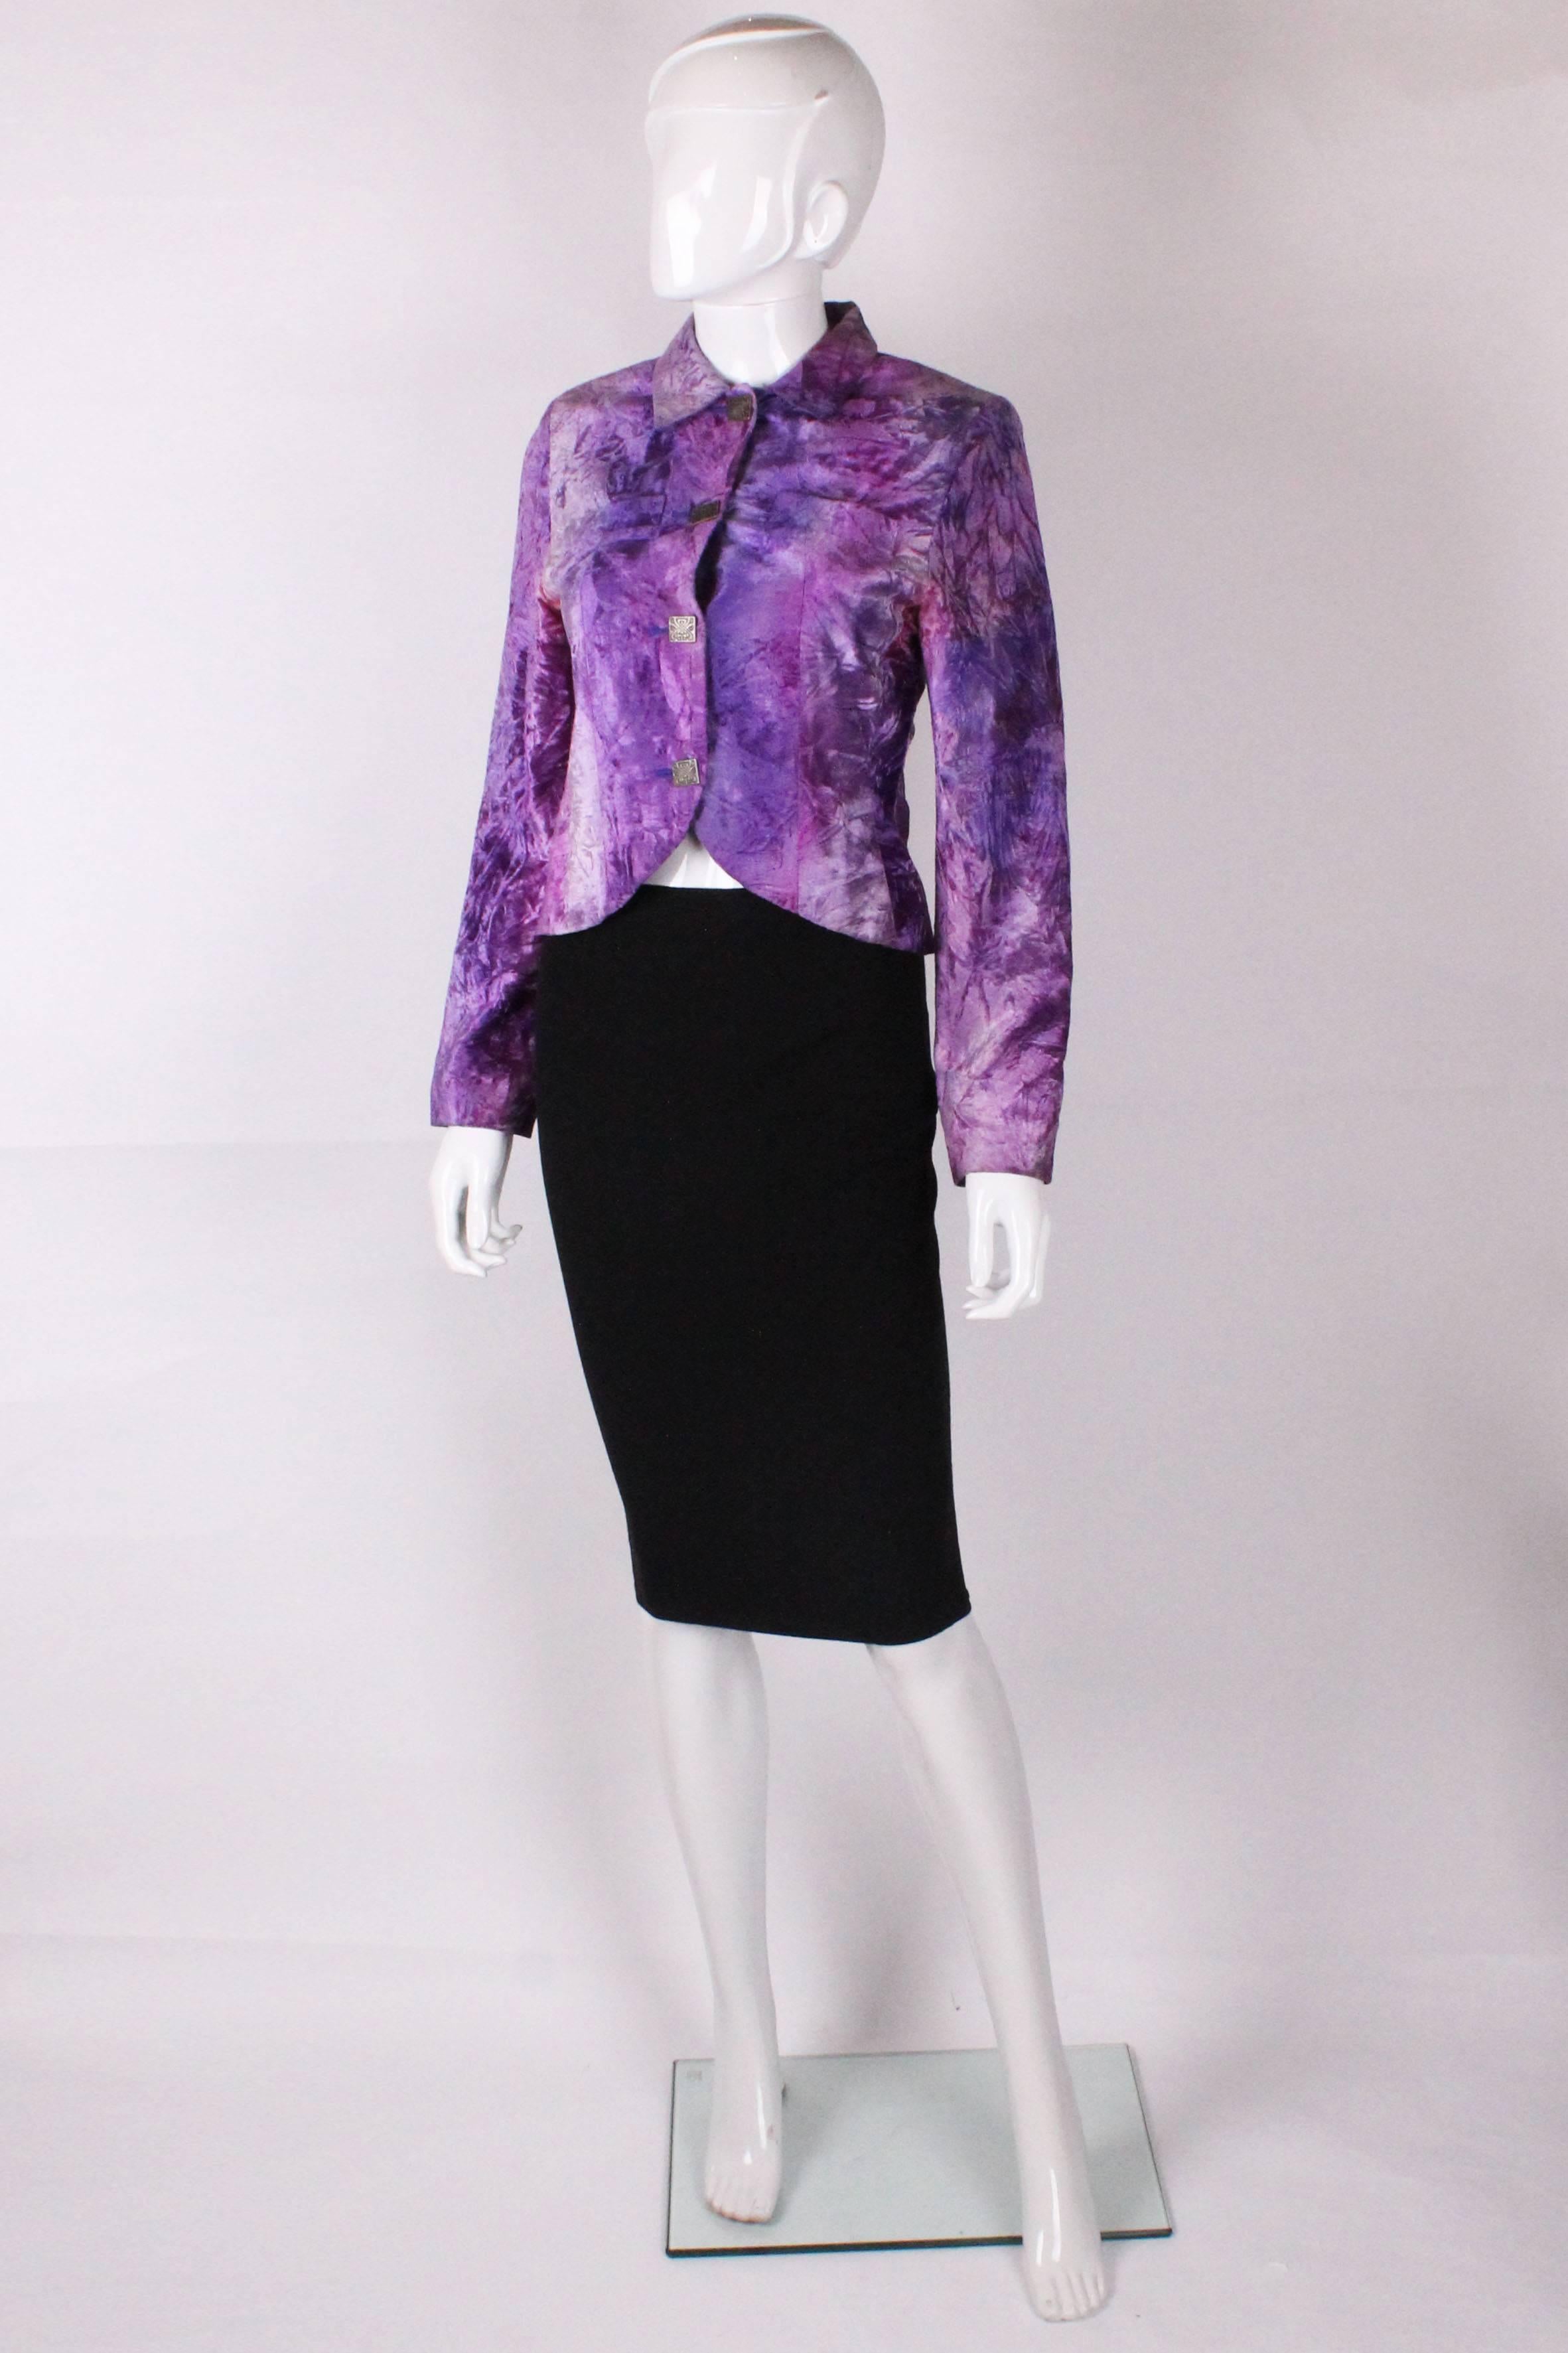 A great  vintage jacket by Biba. In  crushed velvet and various shades of purple with a wonderful orange lining, this jacket is a real head turner. It has 4 buttons at the front ,with cut away detail at the hem and two breast pockets.

